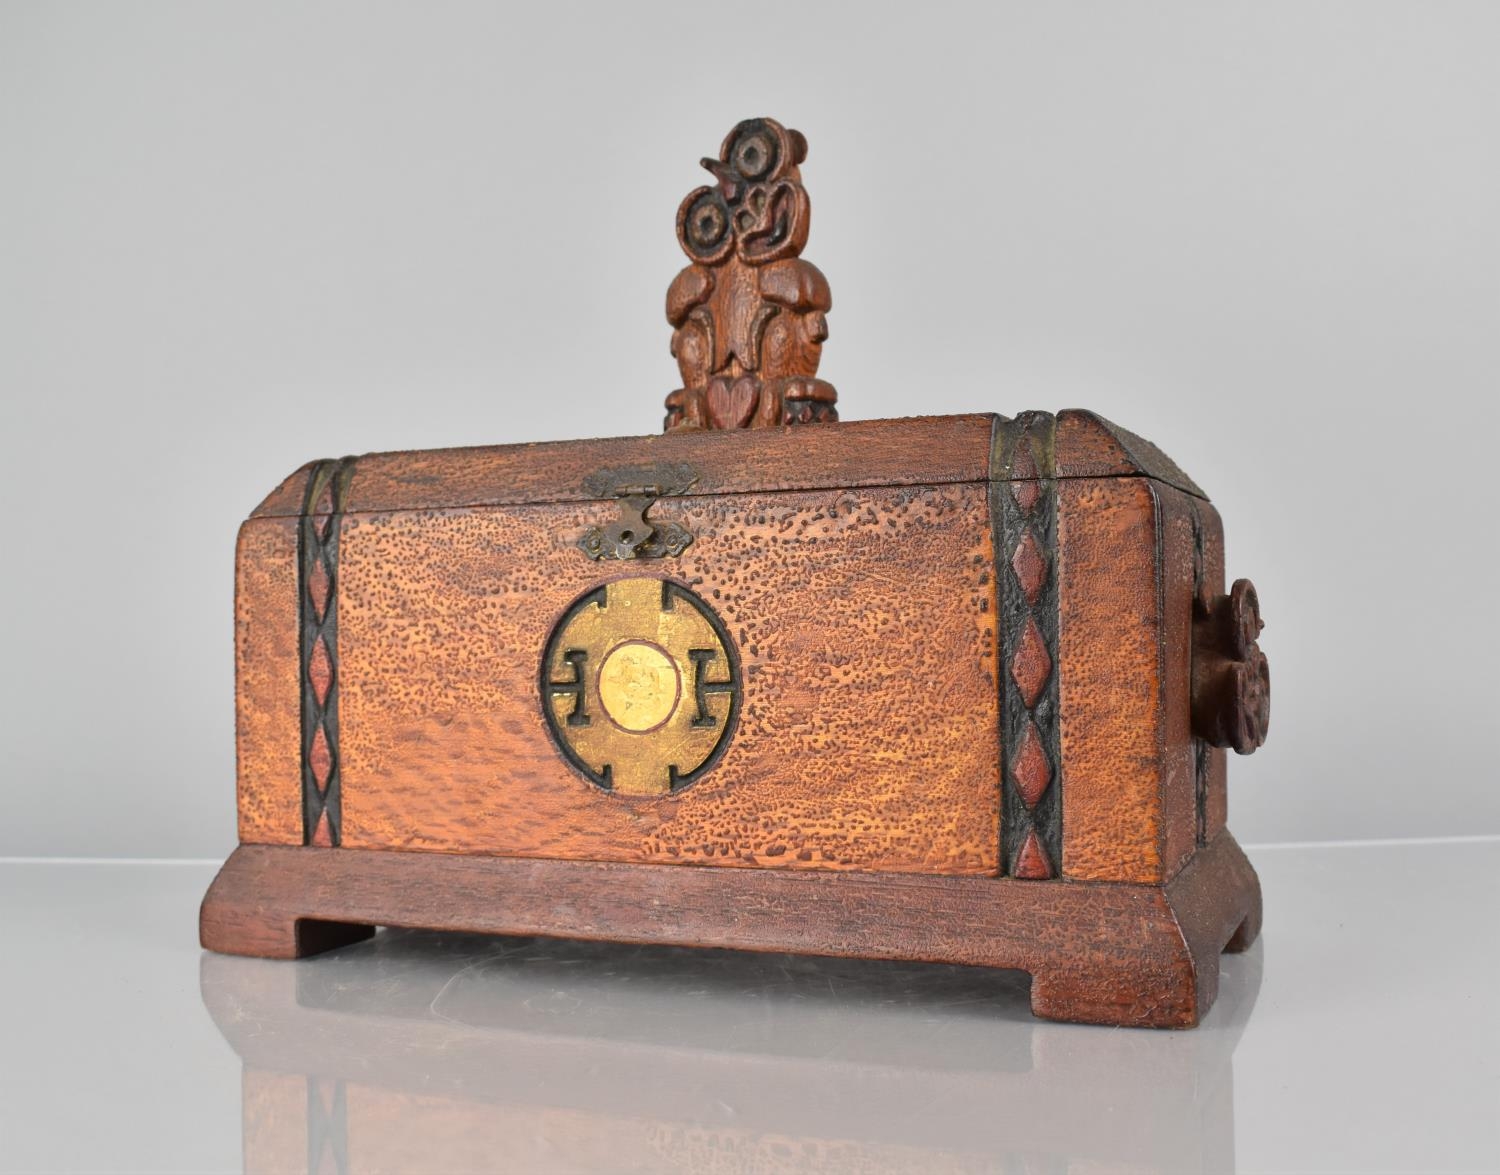 An Early 20th Century New Zealand Maori Carved Wooden Box, Top Decorated with a Carved Hei-Tiki - Image 3 of 6